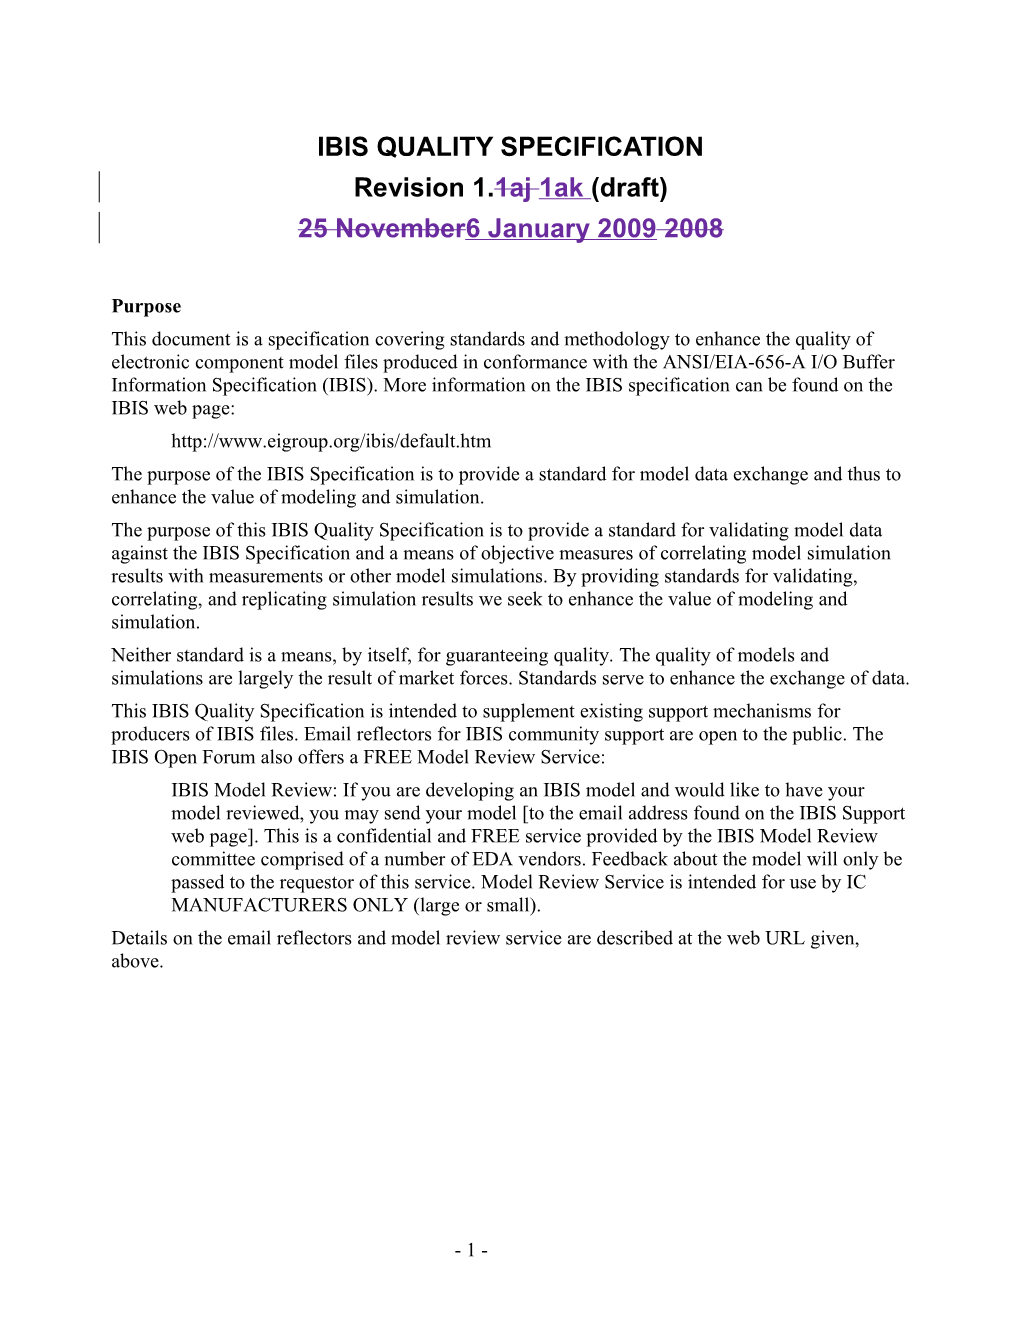 IBIS QUALITY SPECIFICATION - Revision 1